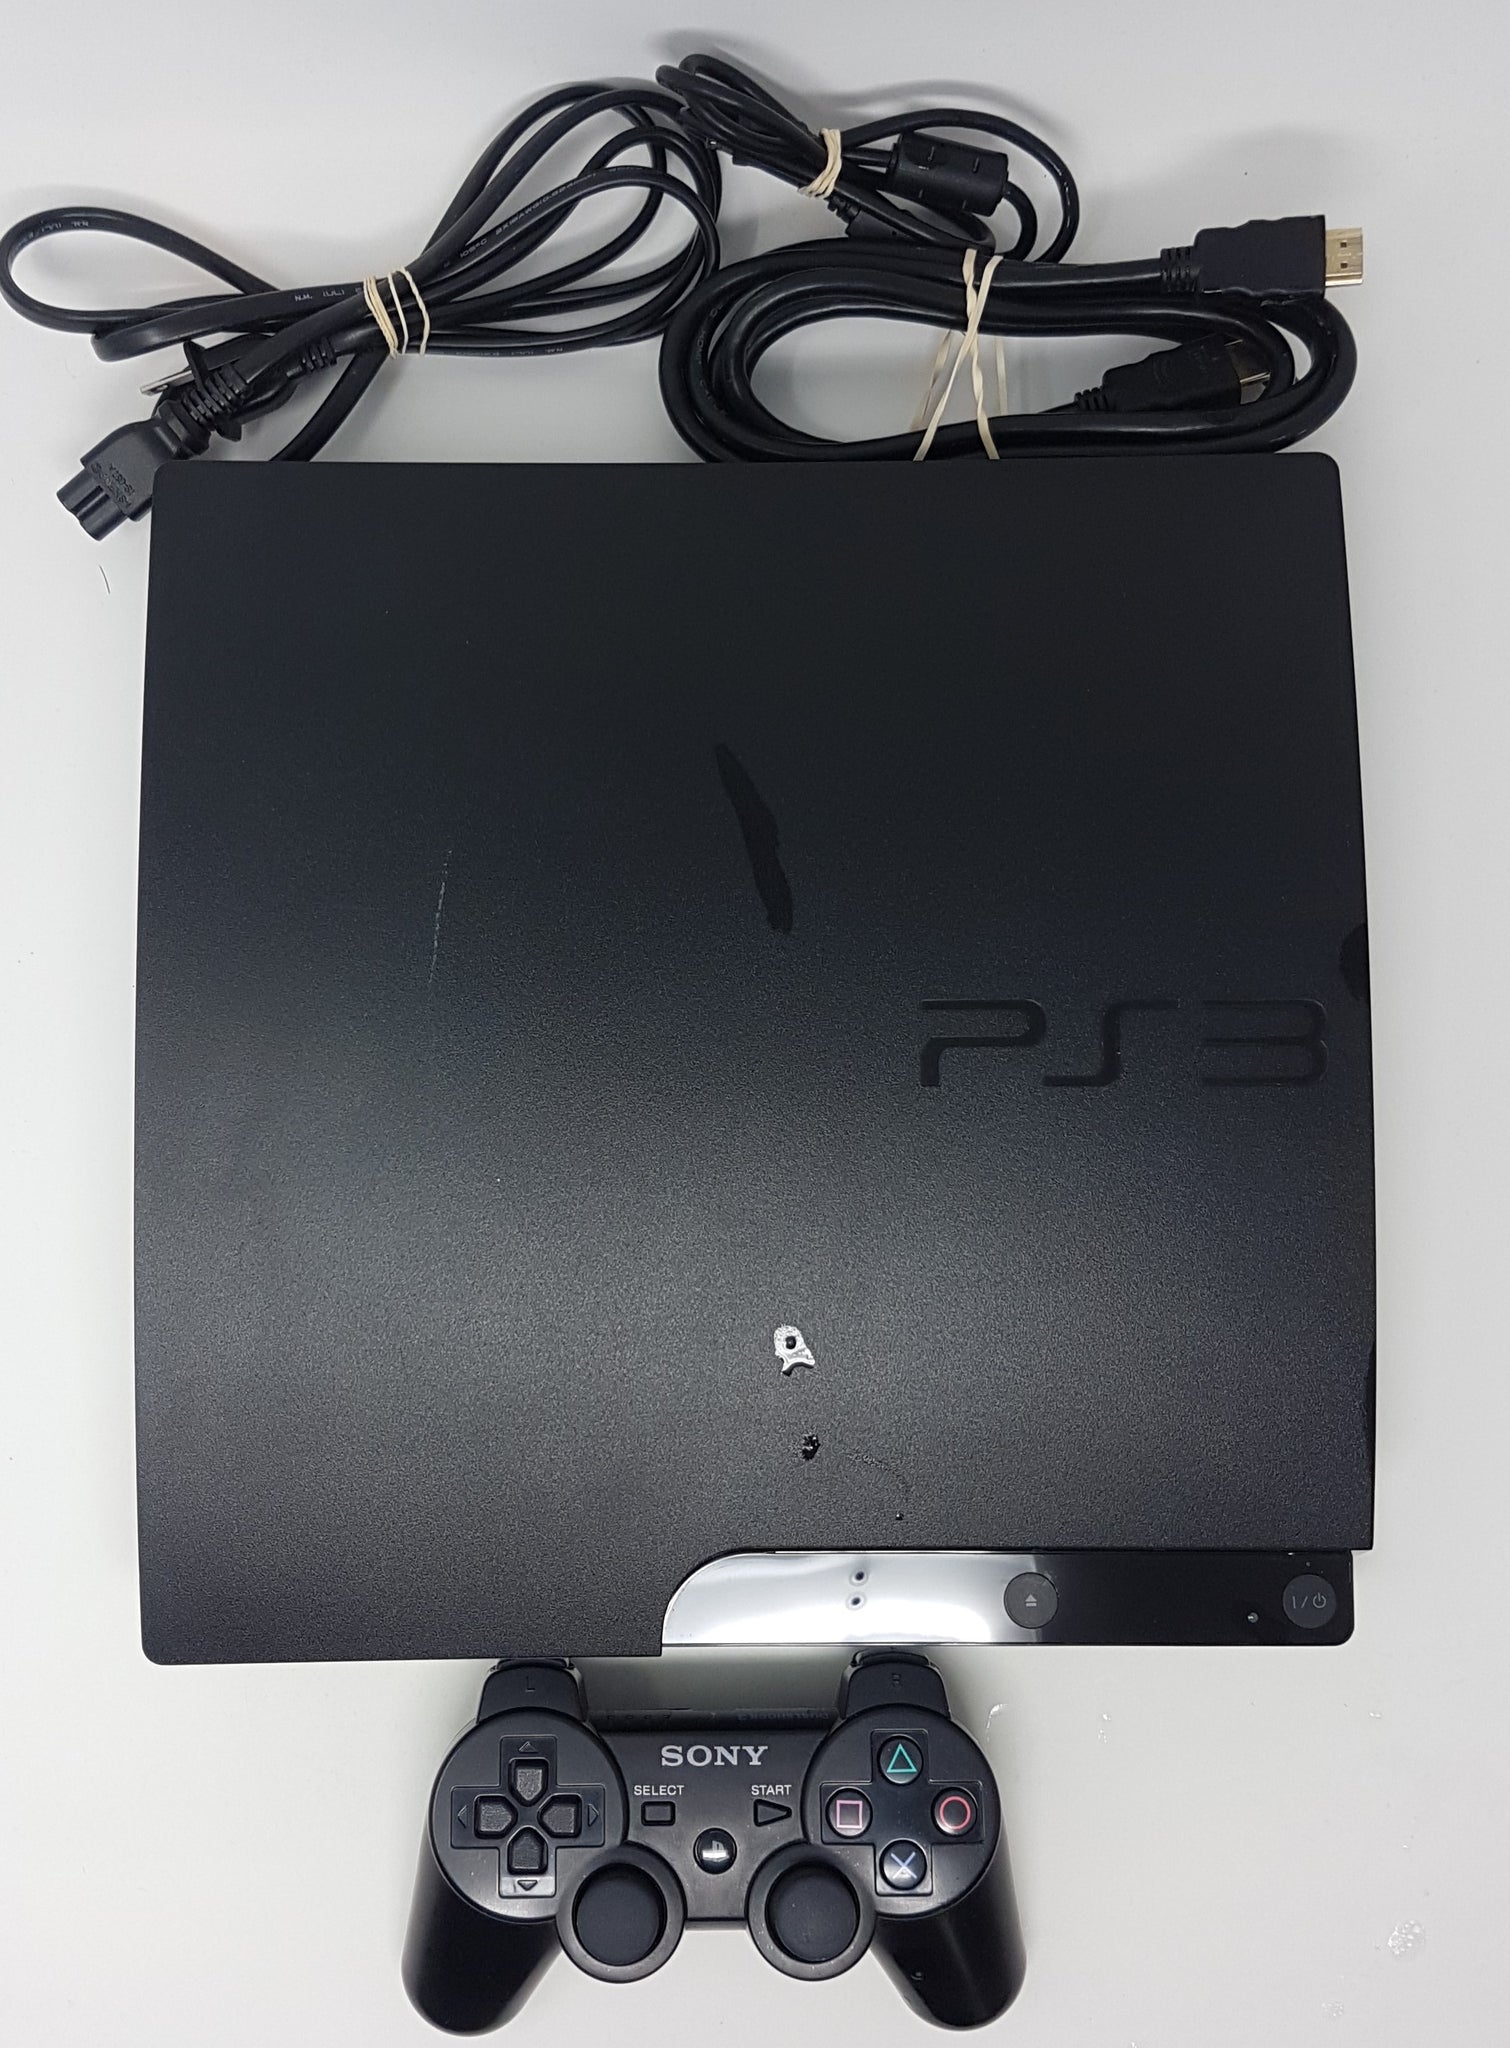 Playstation 3 PS3 160GB System Console Only For Sale